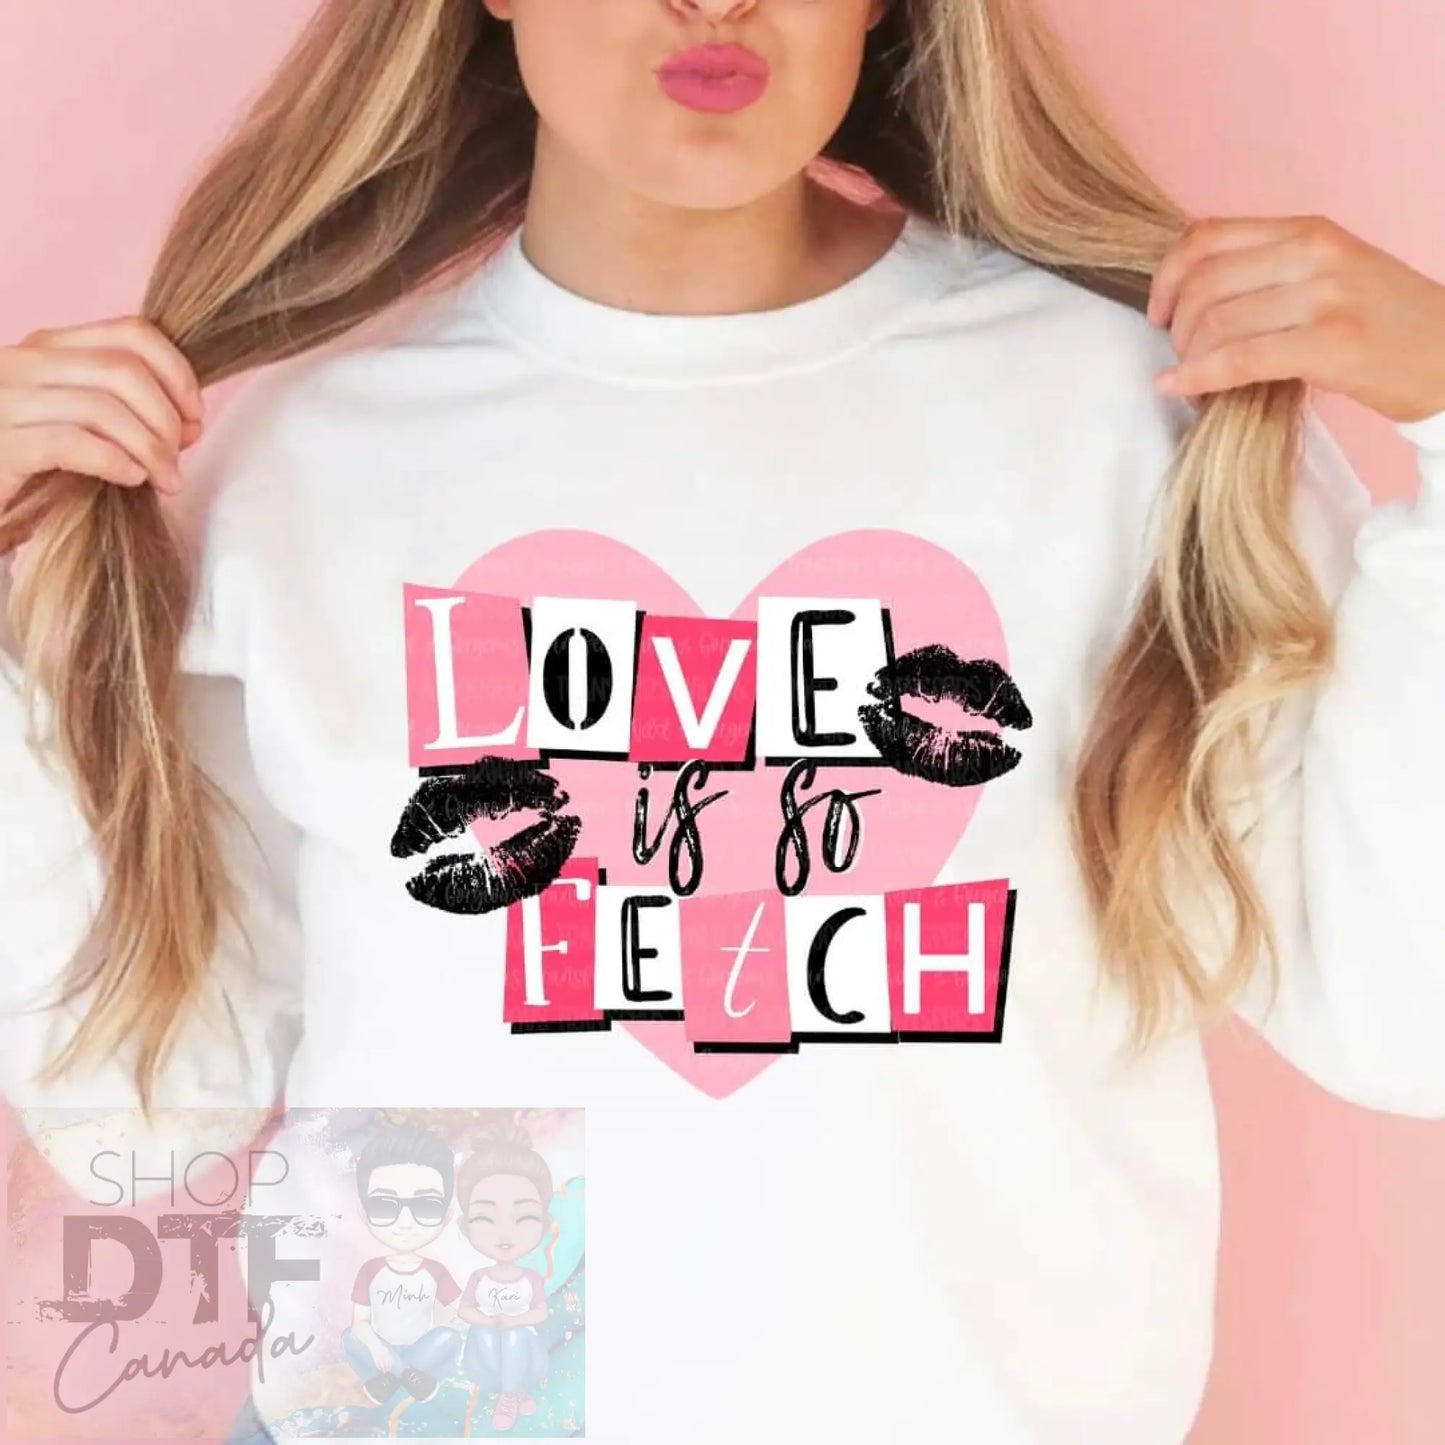 Valentine’s Day - love is so fetch - Shirts & Tops